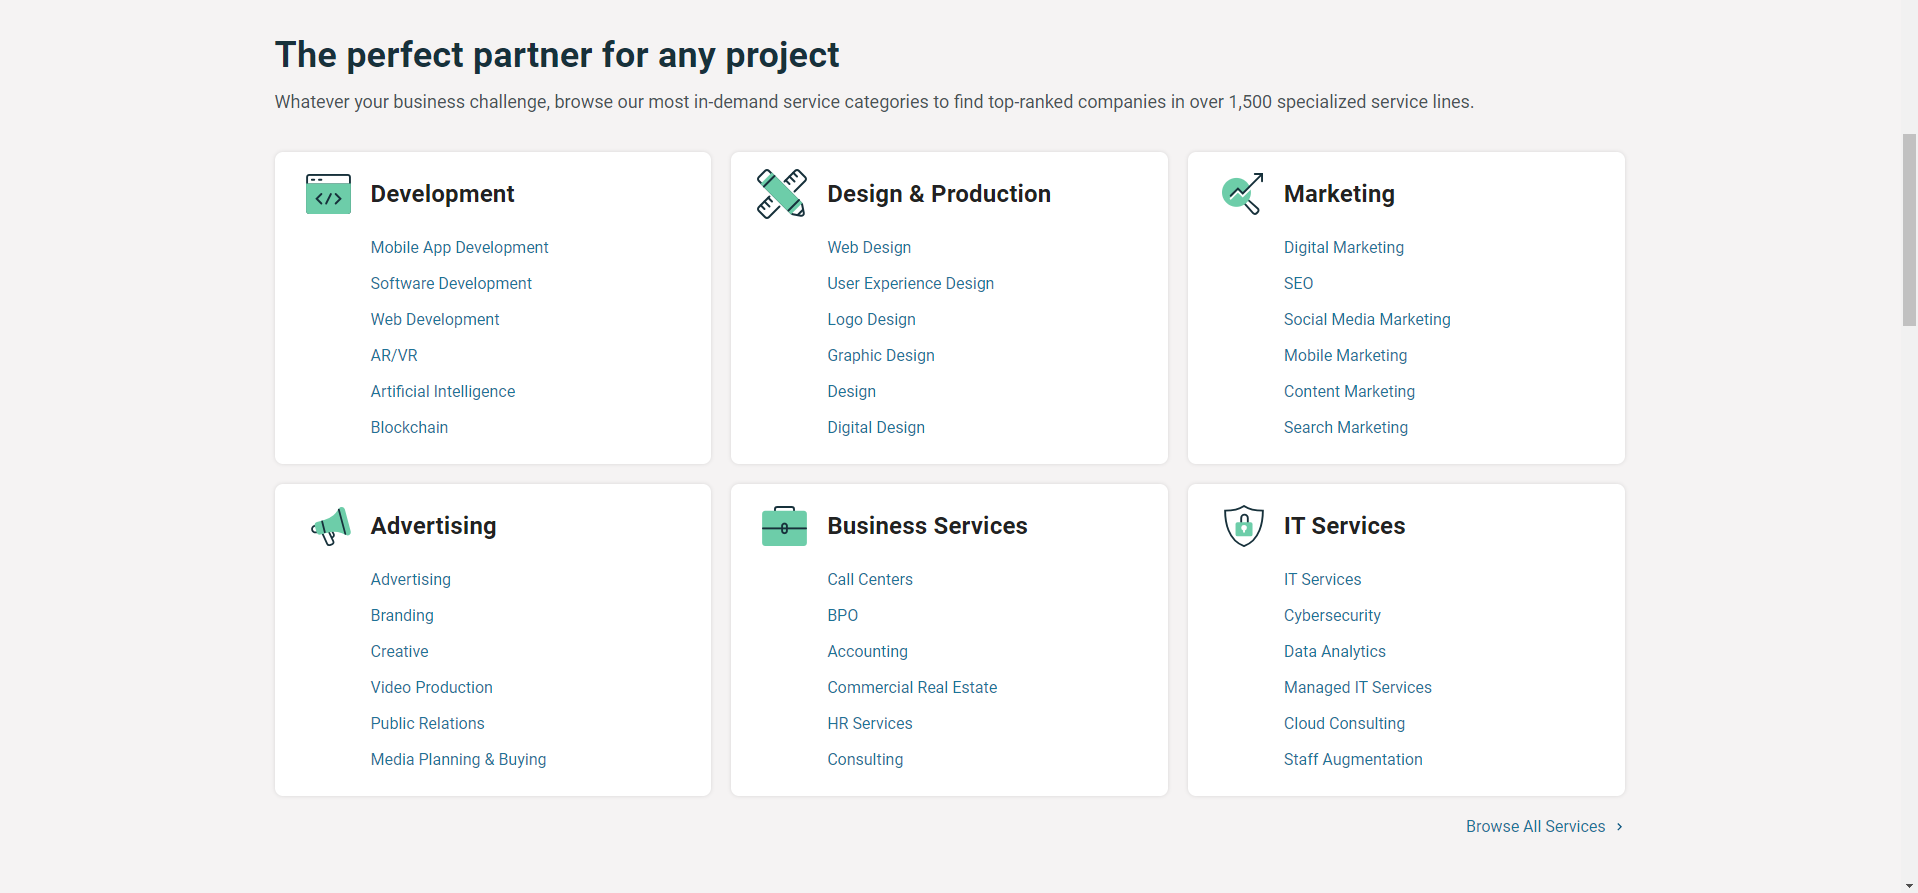 Screenshot showcasing a variety of service categories listed on a directory platform, including Development, Design & Production, Marketing, Advertising, Business Services, and IT Services, illustrating the extensive options available for finding specialized software development partners.